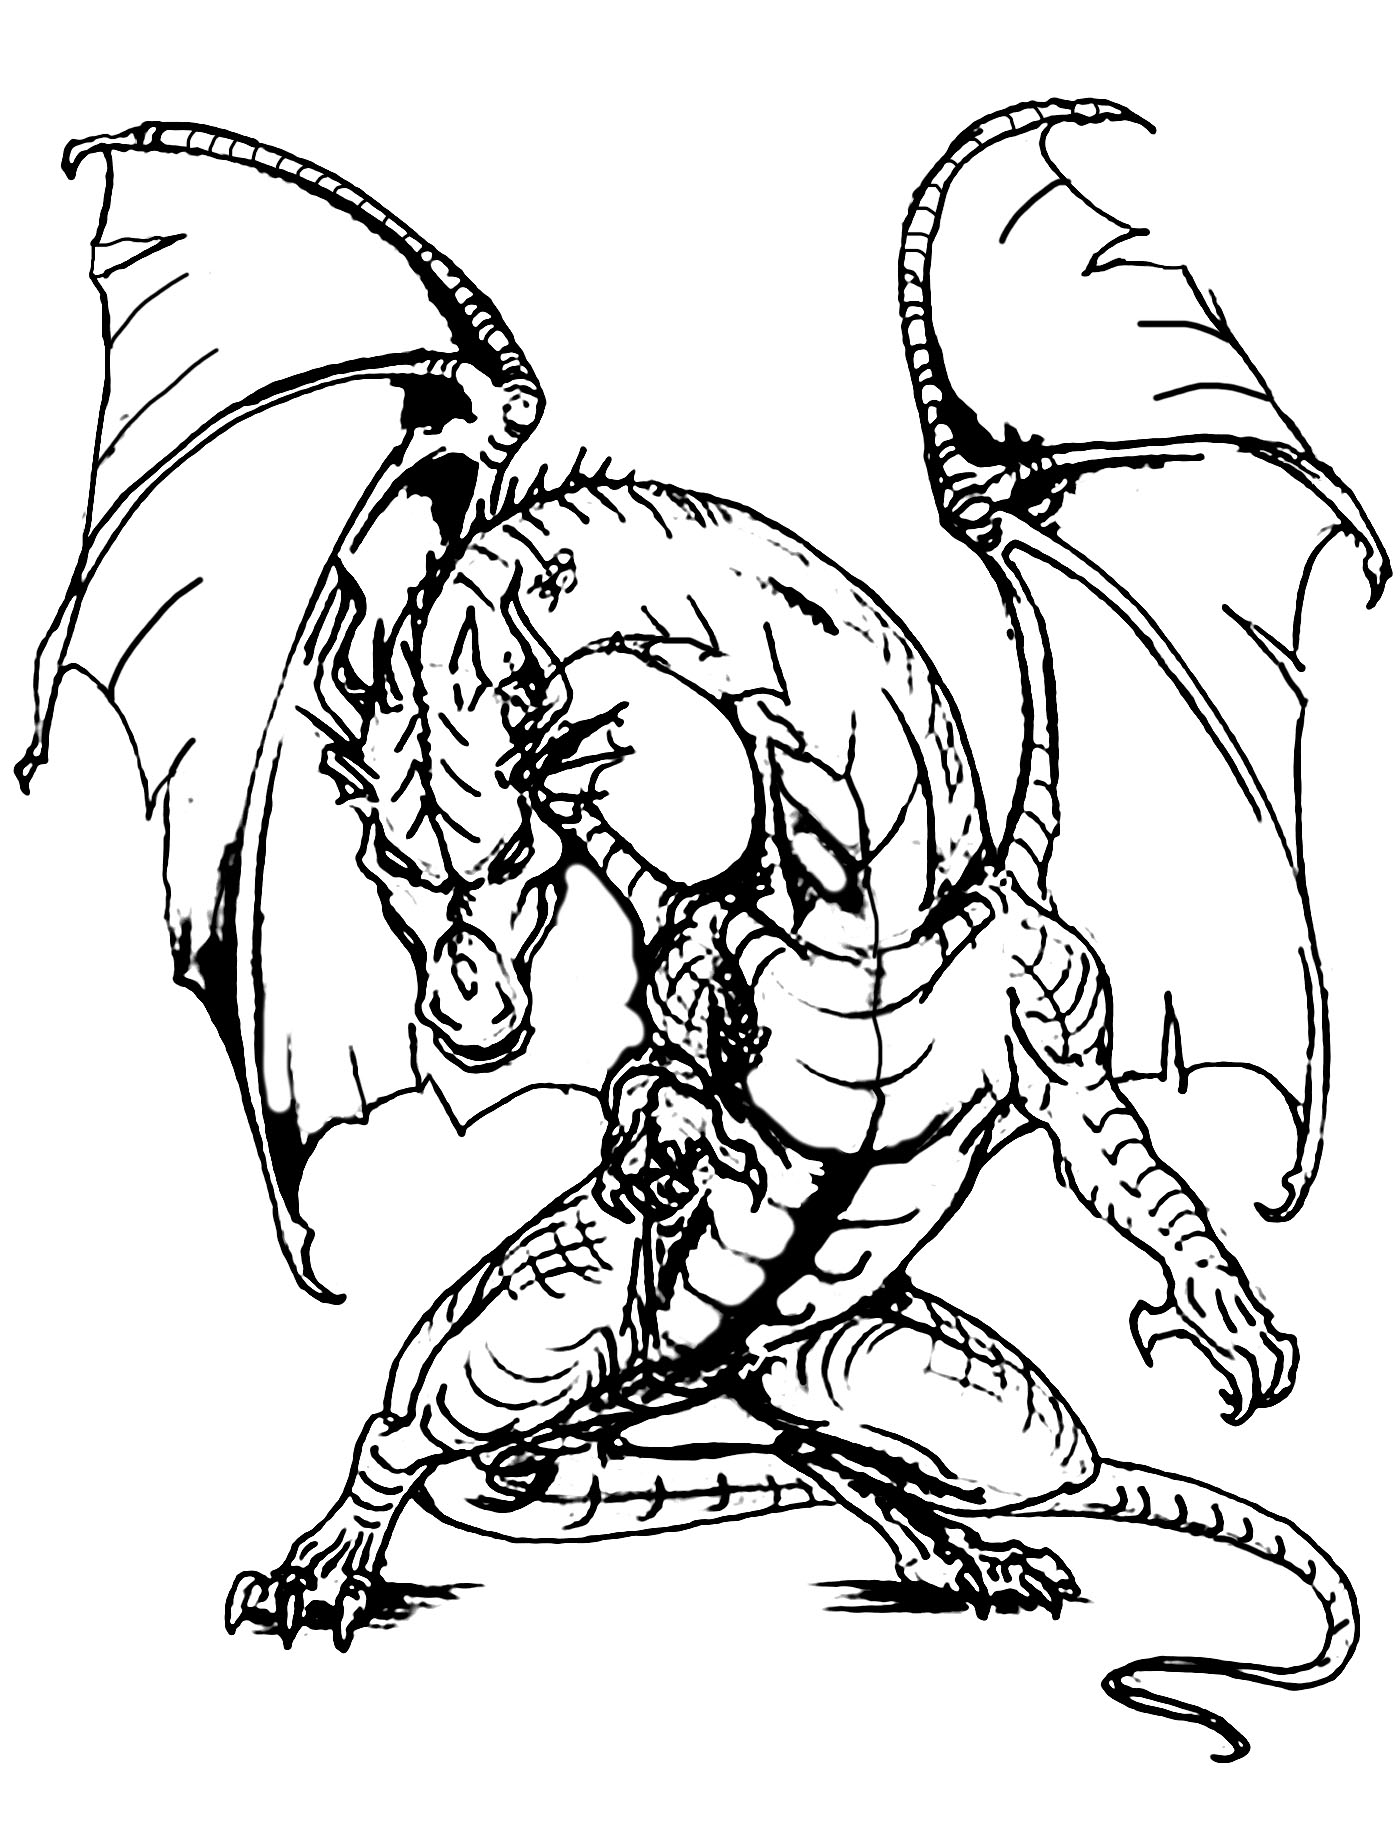 Giant dragon Myths legends Coloring pages for adults